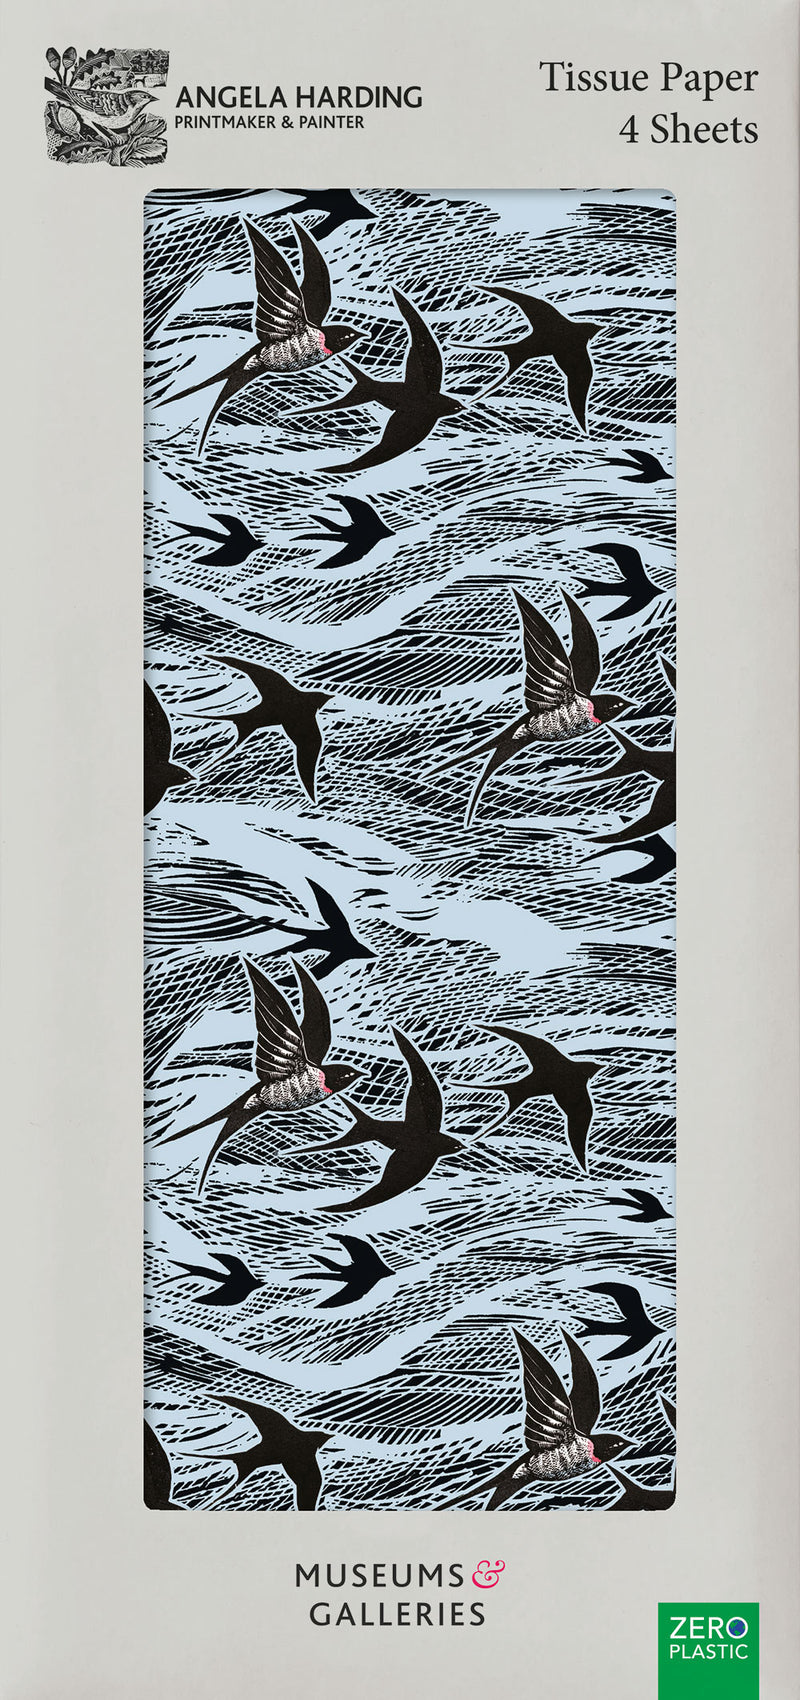 Swallows and Sea by Angela Harding Pack of 4 Sheets of Tissue Paper